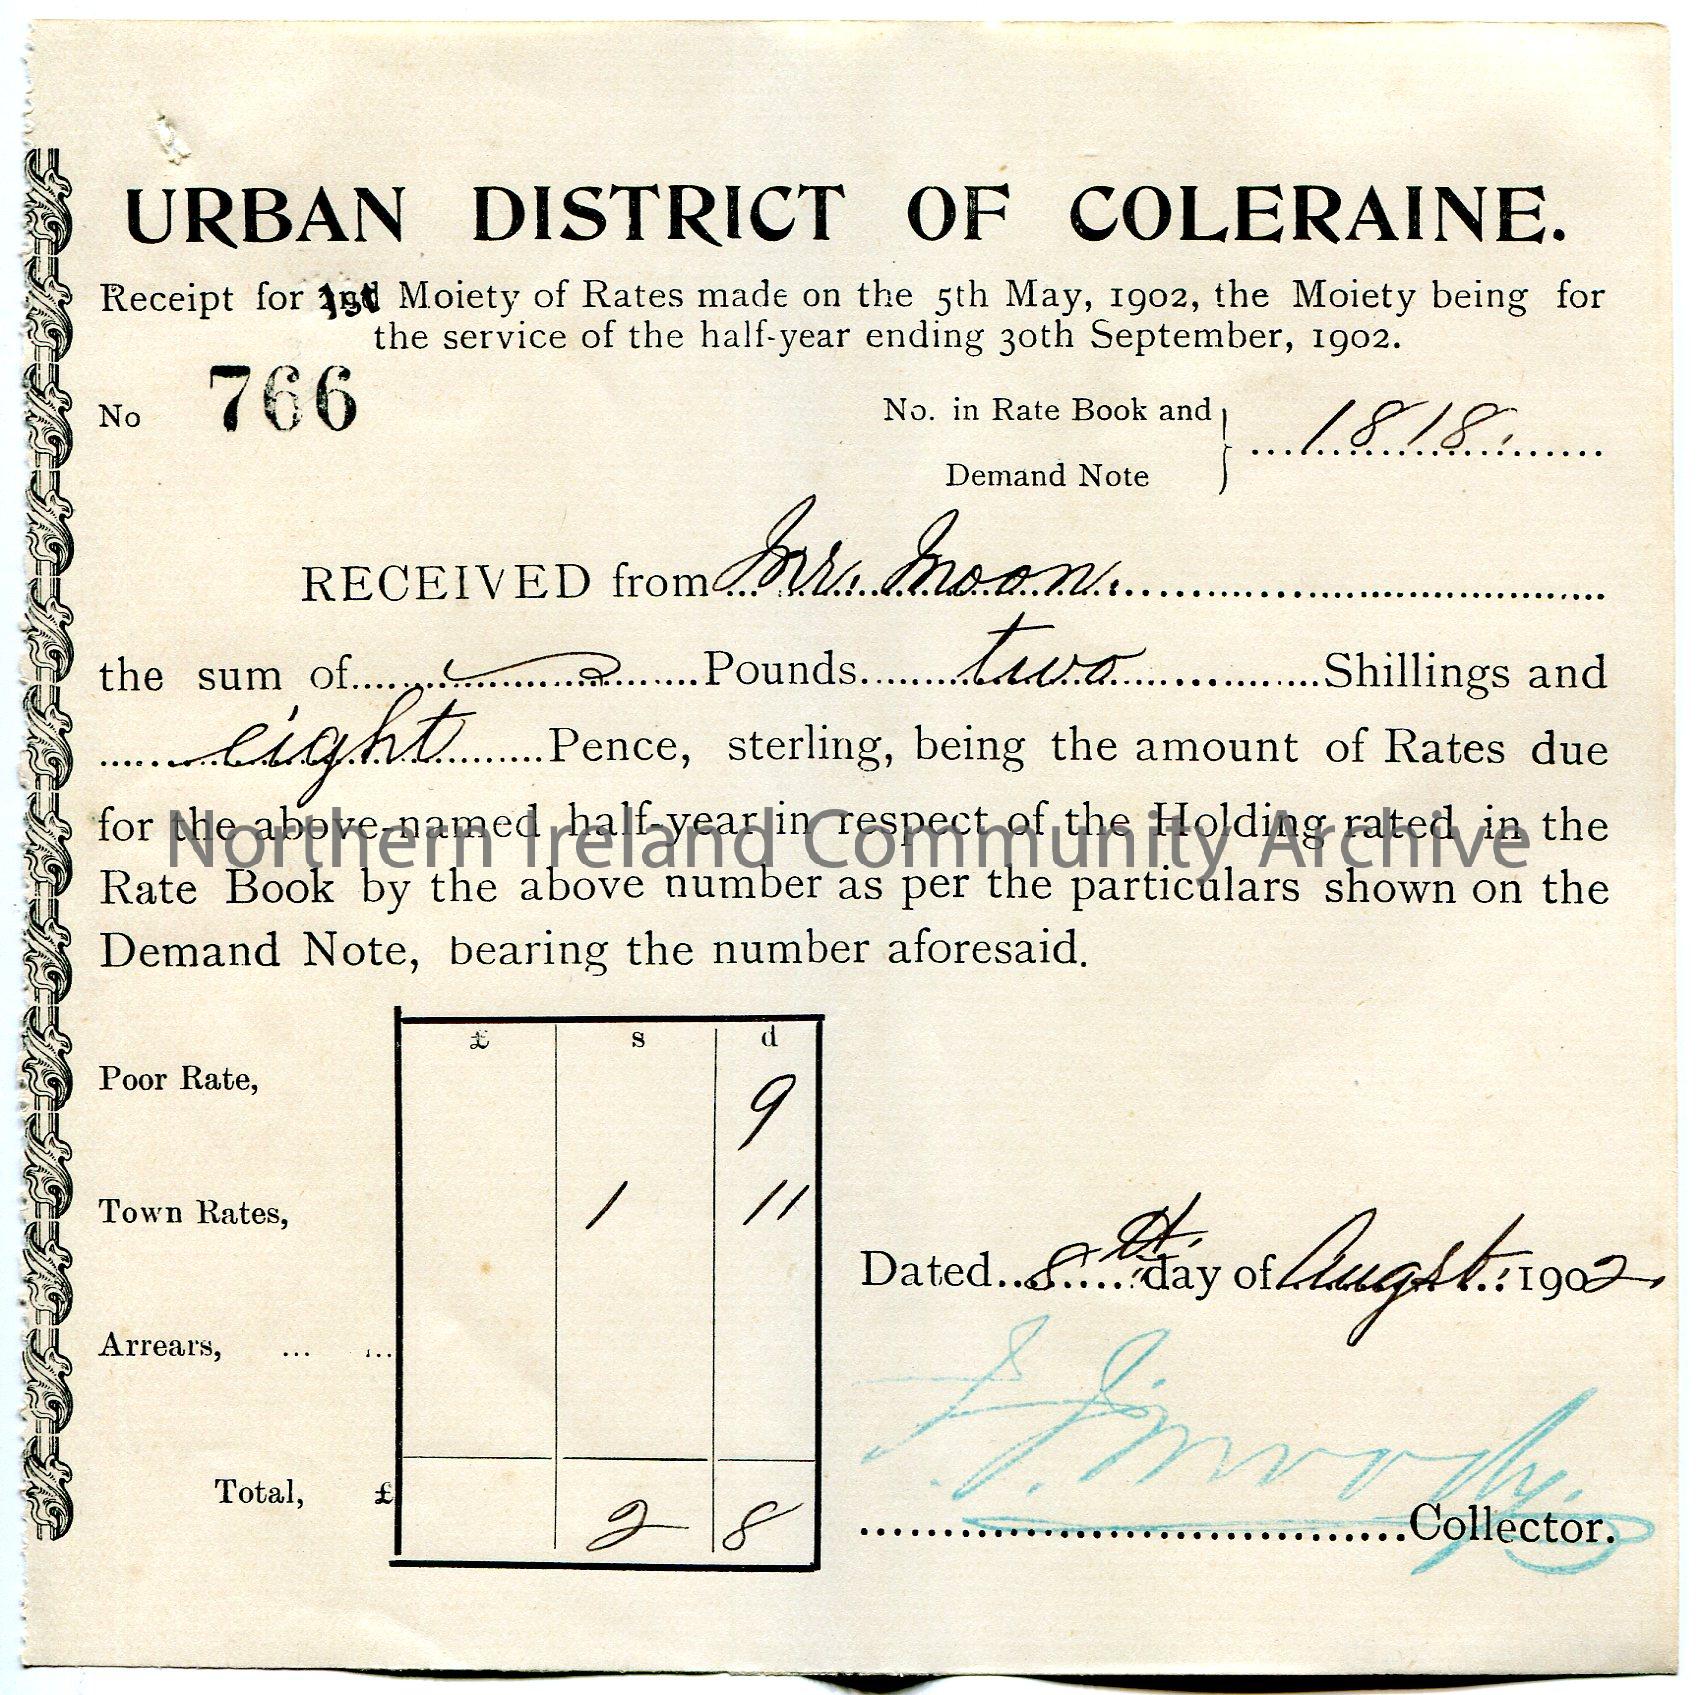 Printed and handwritten receipt for half year rates ending 30th September, 1902 for a property. Receipt no. 766. Issued by Urban District of Coleraine…